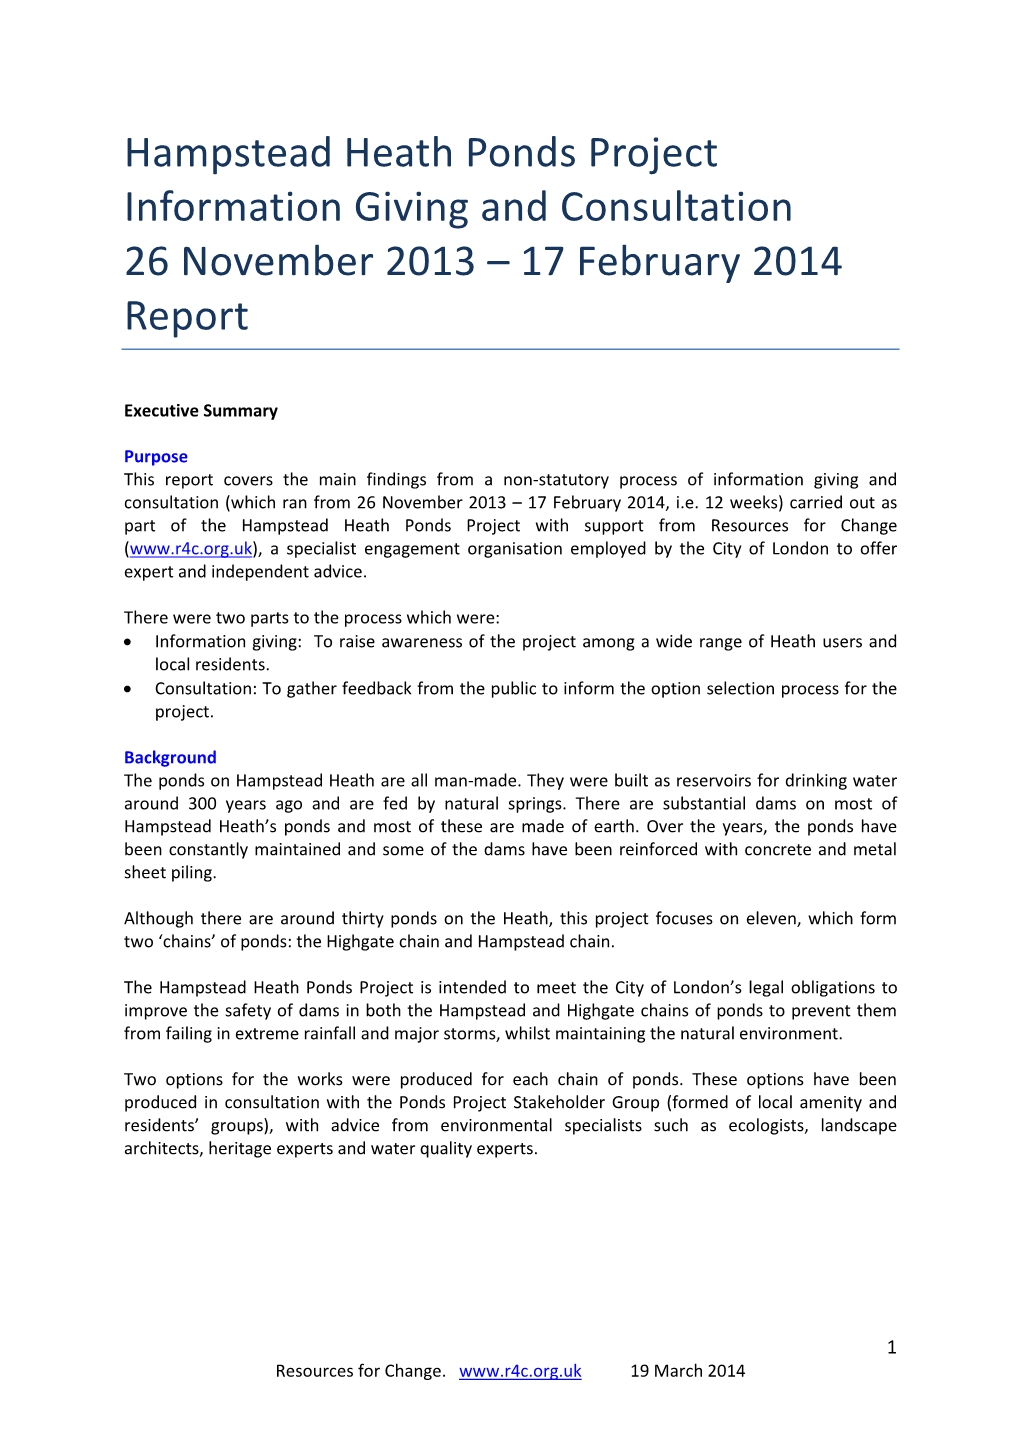 Hampstead Heath Ponds Project Information Giving and Consultation 26 November 2013 – 17 February 2014 Report